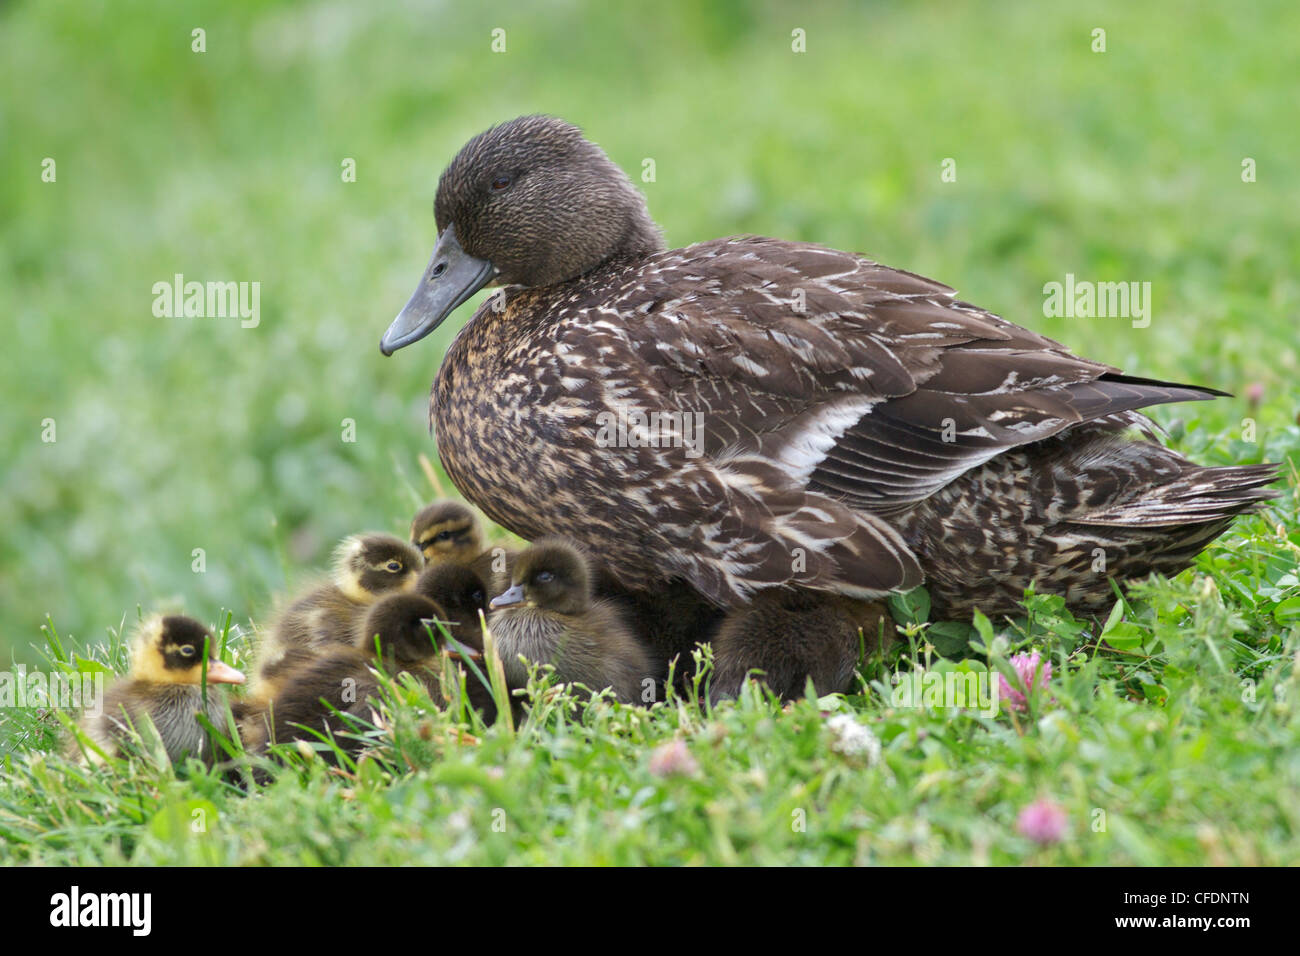 American Black Duck (Anus rubripes) perched on the ground in Newfoundland, Canada. Stock Photo